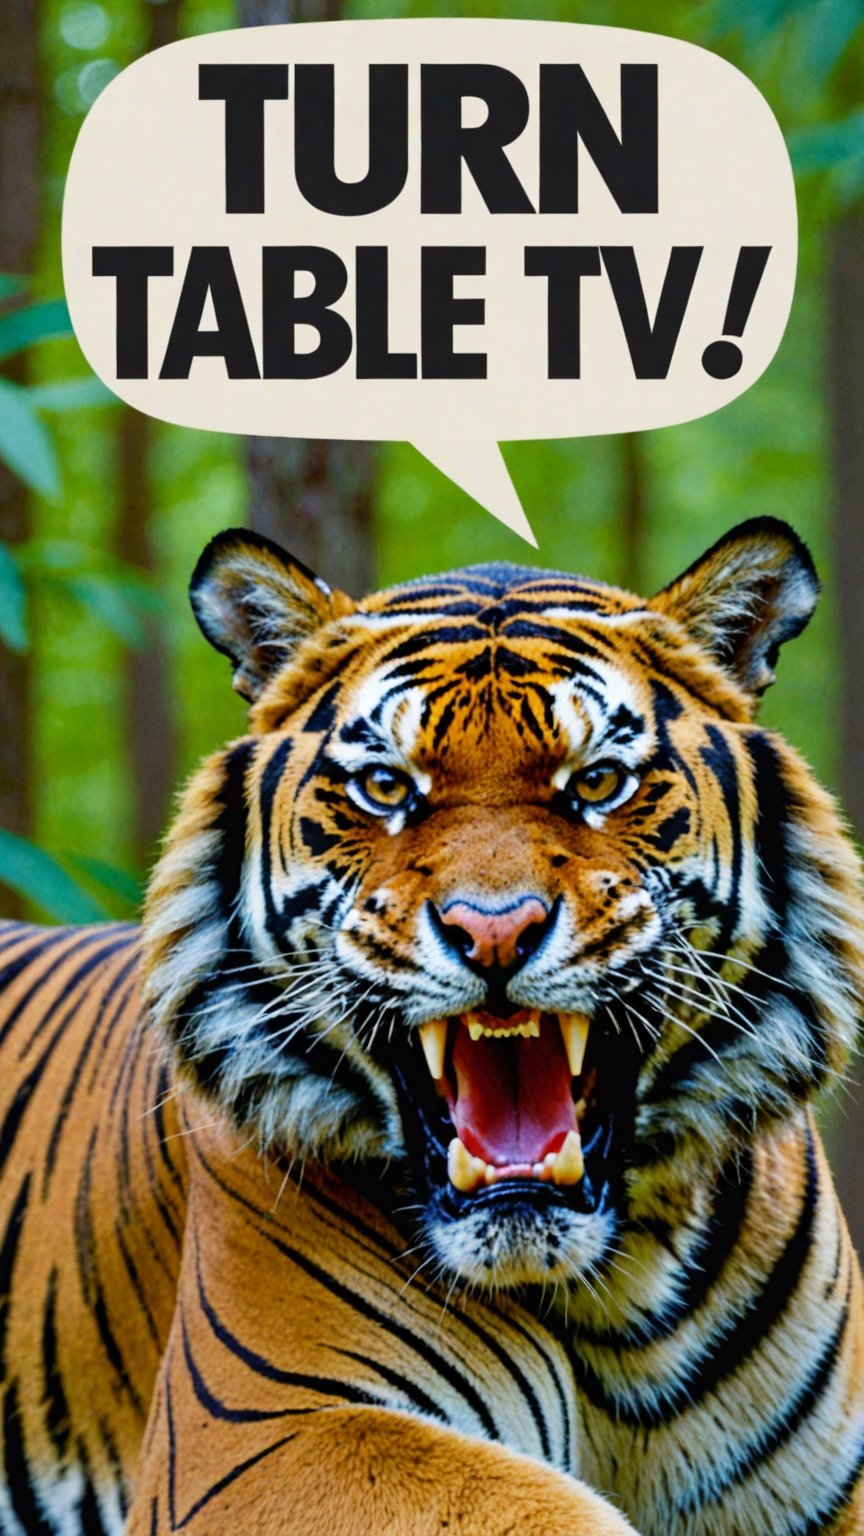 Photo of angry tiger in woods with text bubble that says "turn table tv"